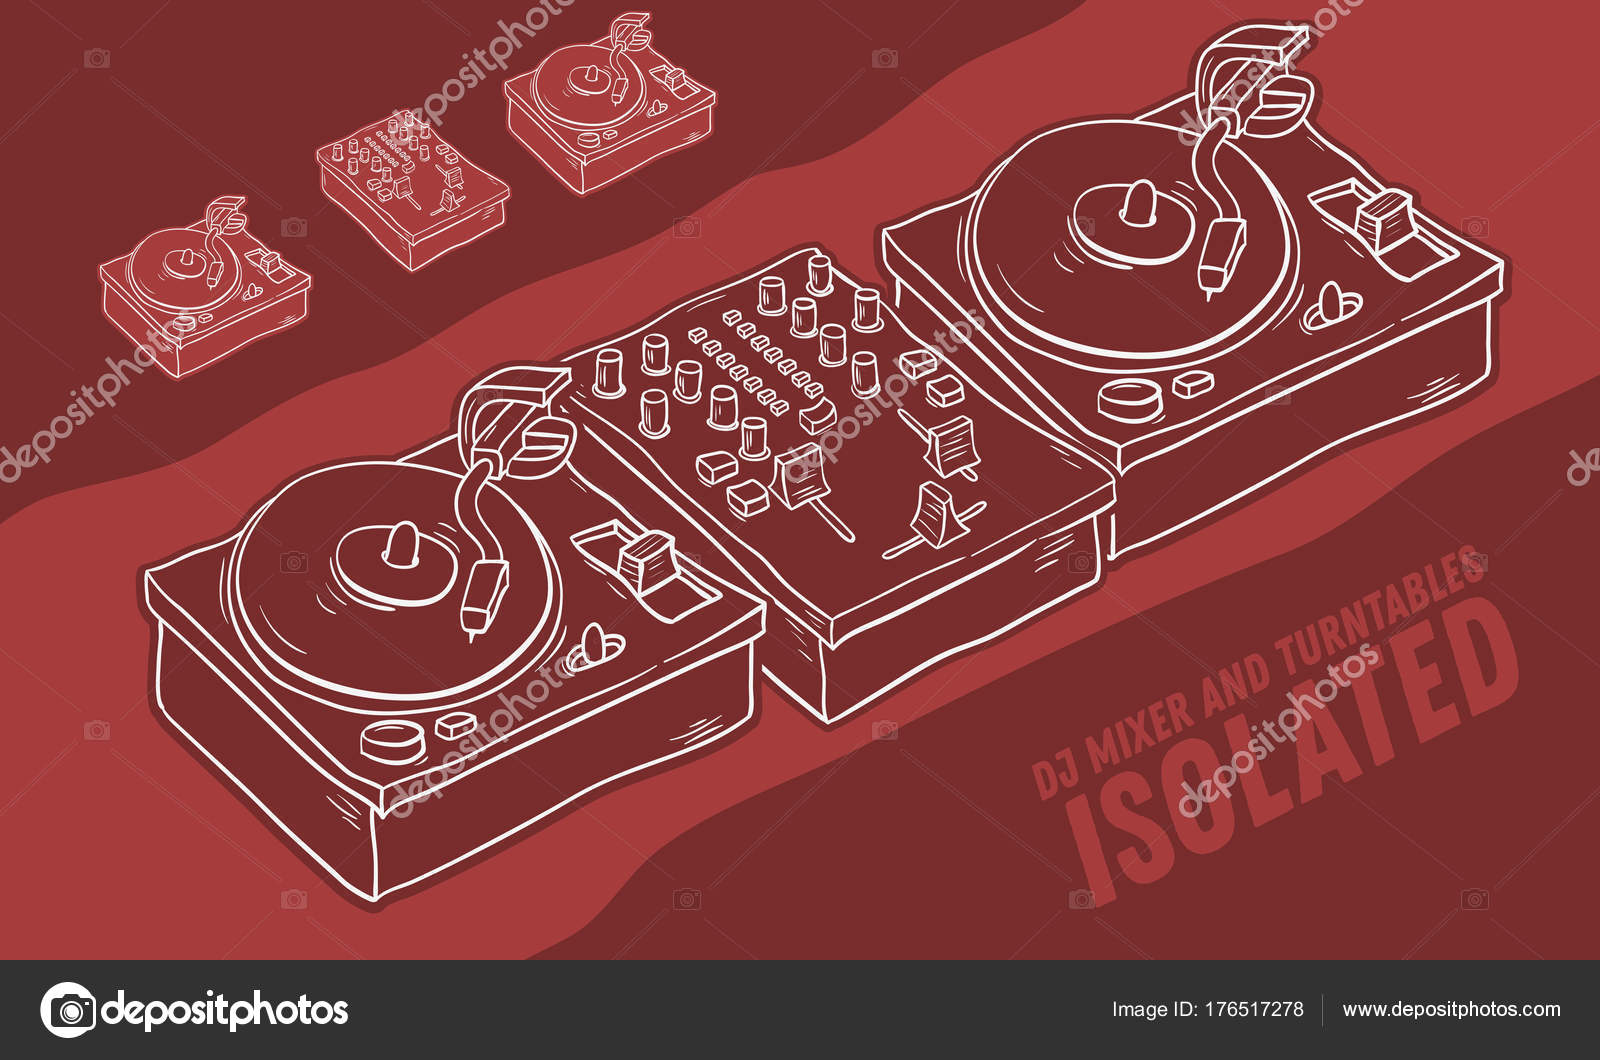 Dj Audio Equipment Sound Mixer And Turntables Drawing Isolated. Artistic  Cartoon Hand Drawn Sketchy Line Art Style. Stock Vector Image by ©Anton345  #176517278